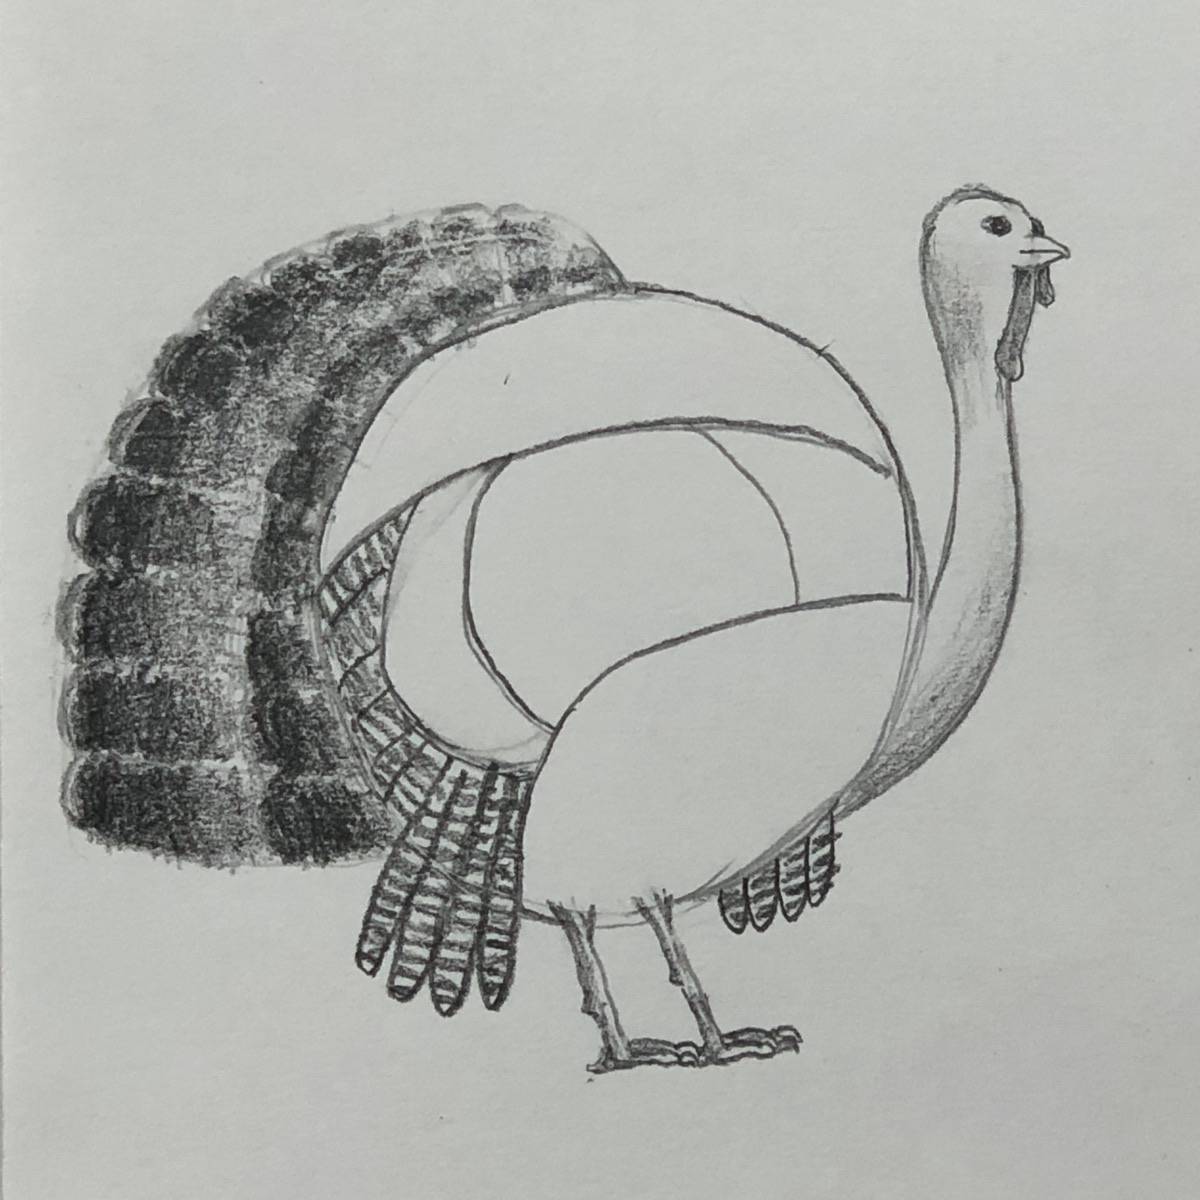 Sketch of a turkey with the tail feathers shaded in and stripped pattern offed to the wing feathers.